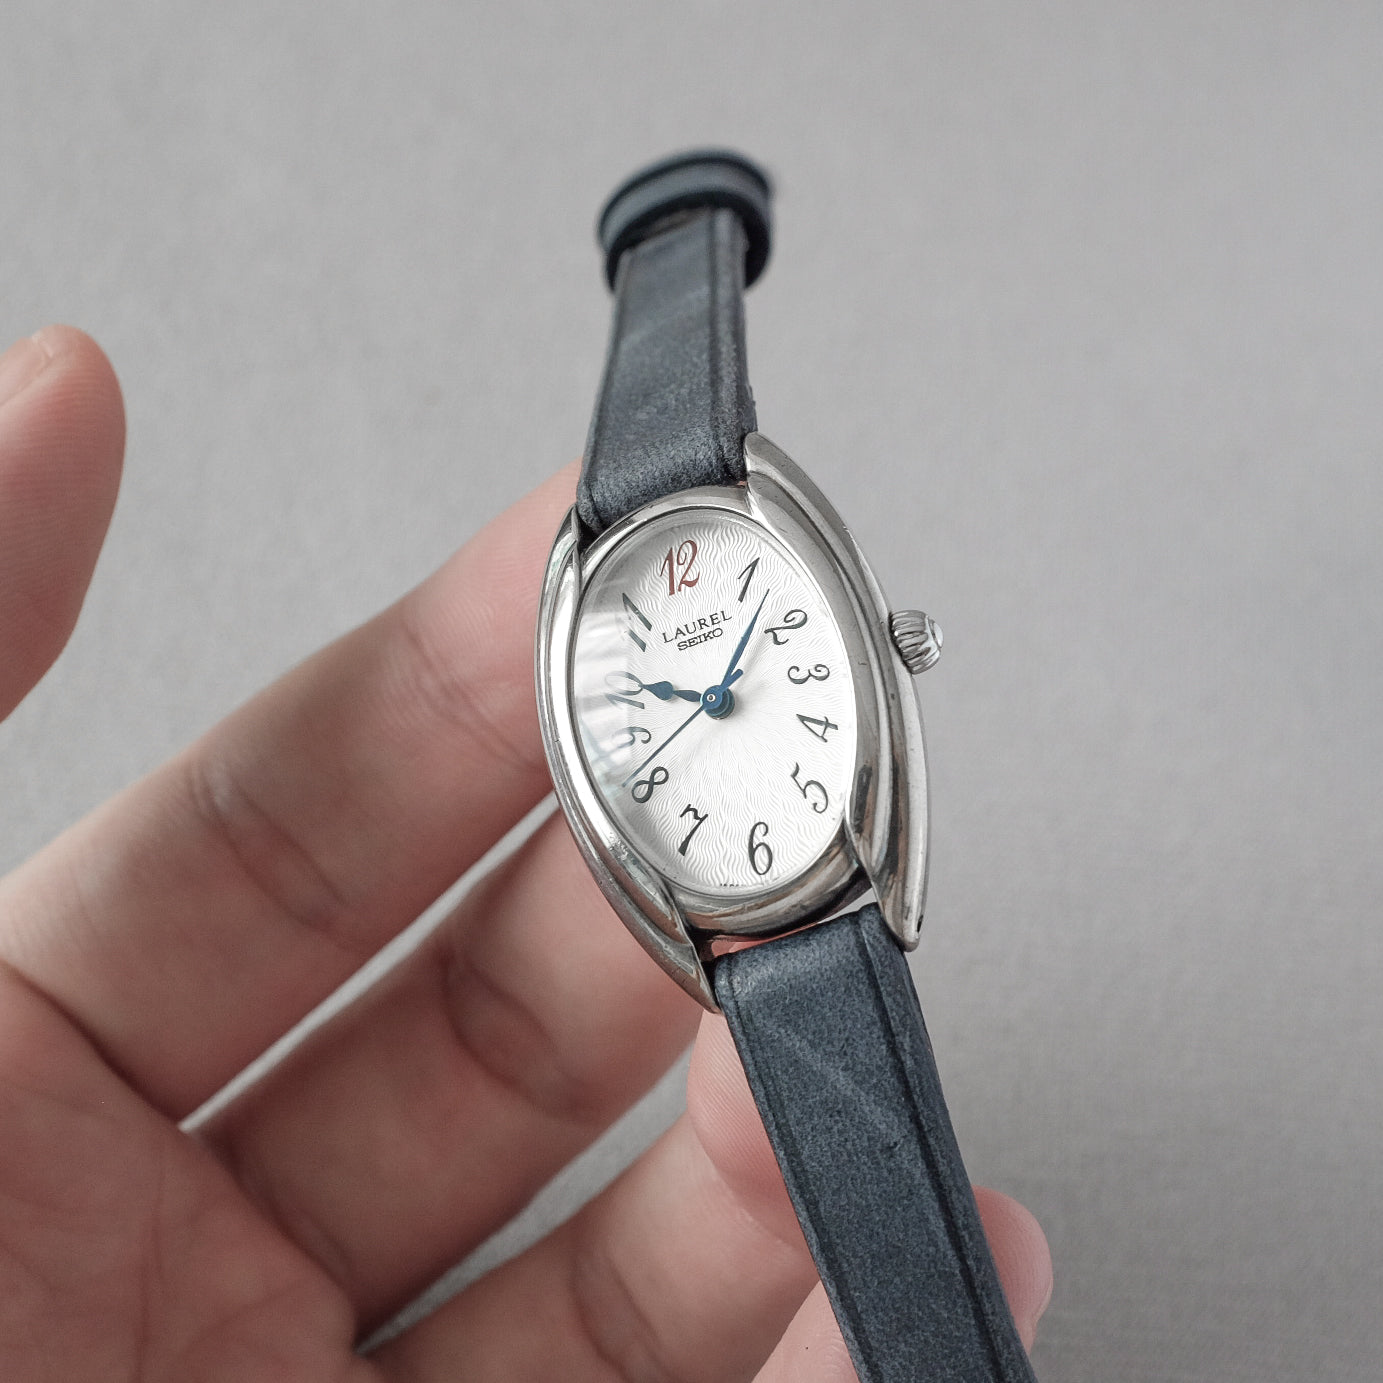 Seiko Laurel 4N21-5380 from 1997 (925 Silver Case)